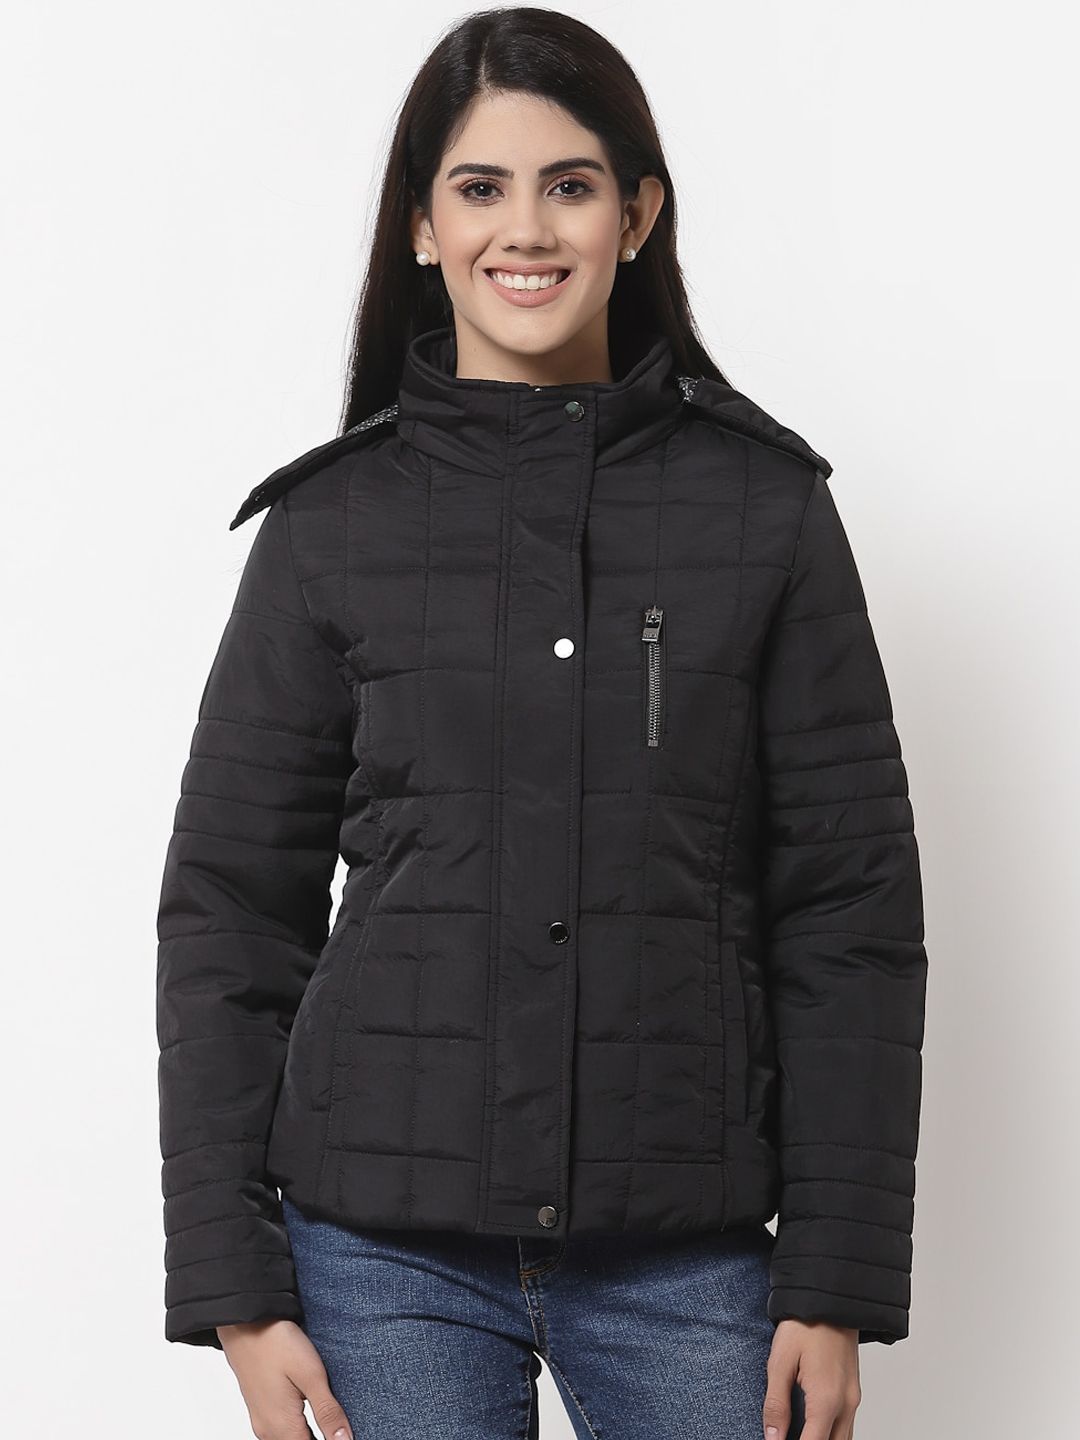 Juelle Women Black Quilted Jacket Price in India